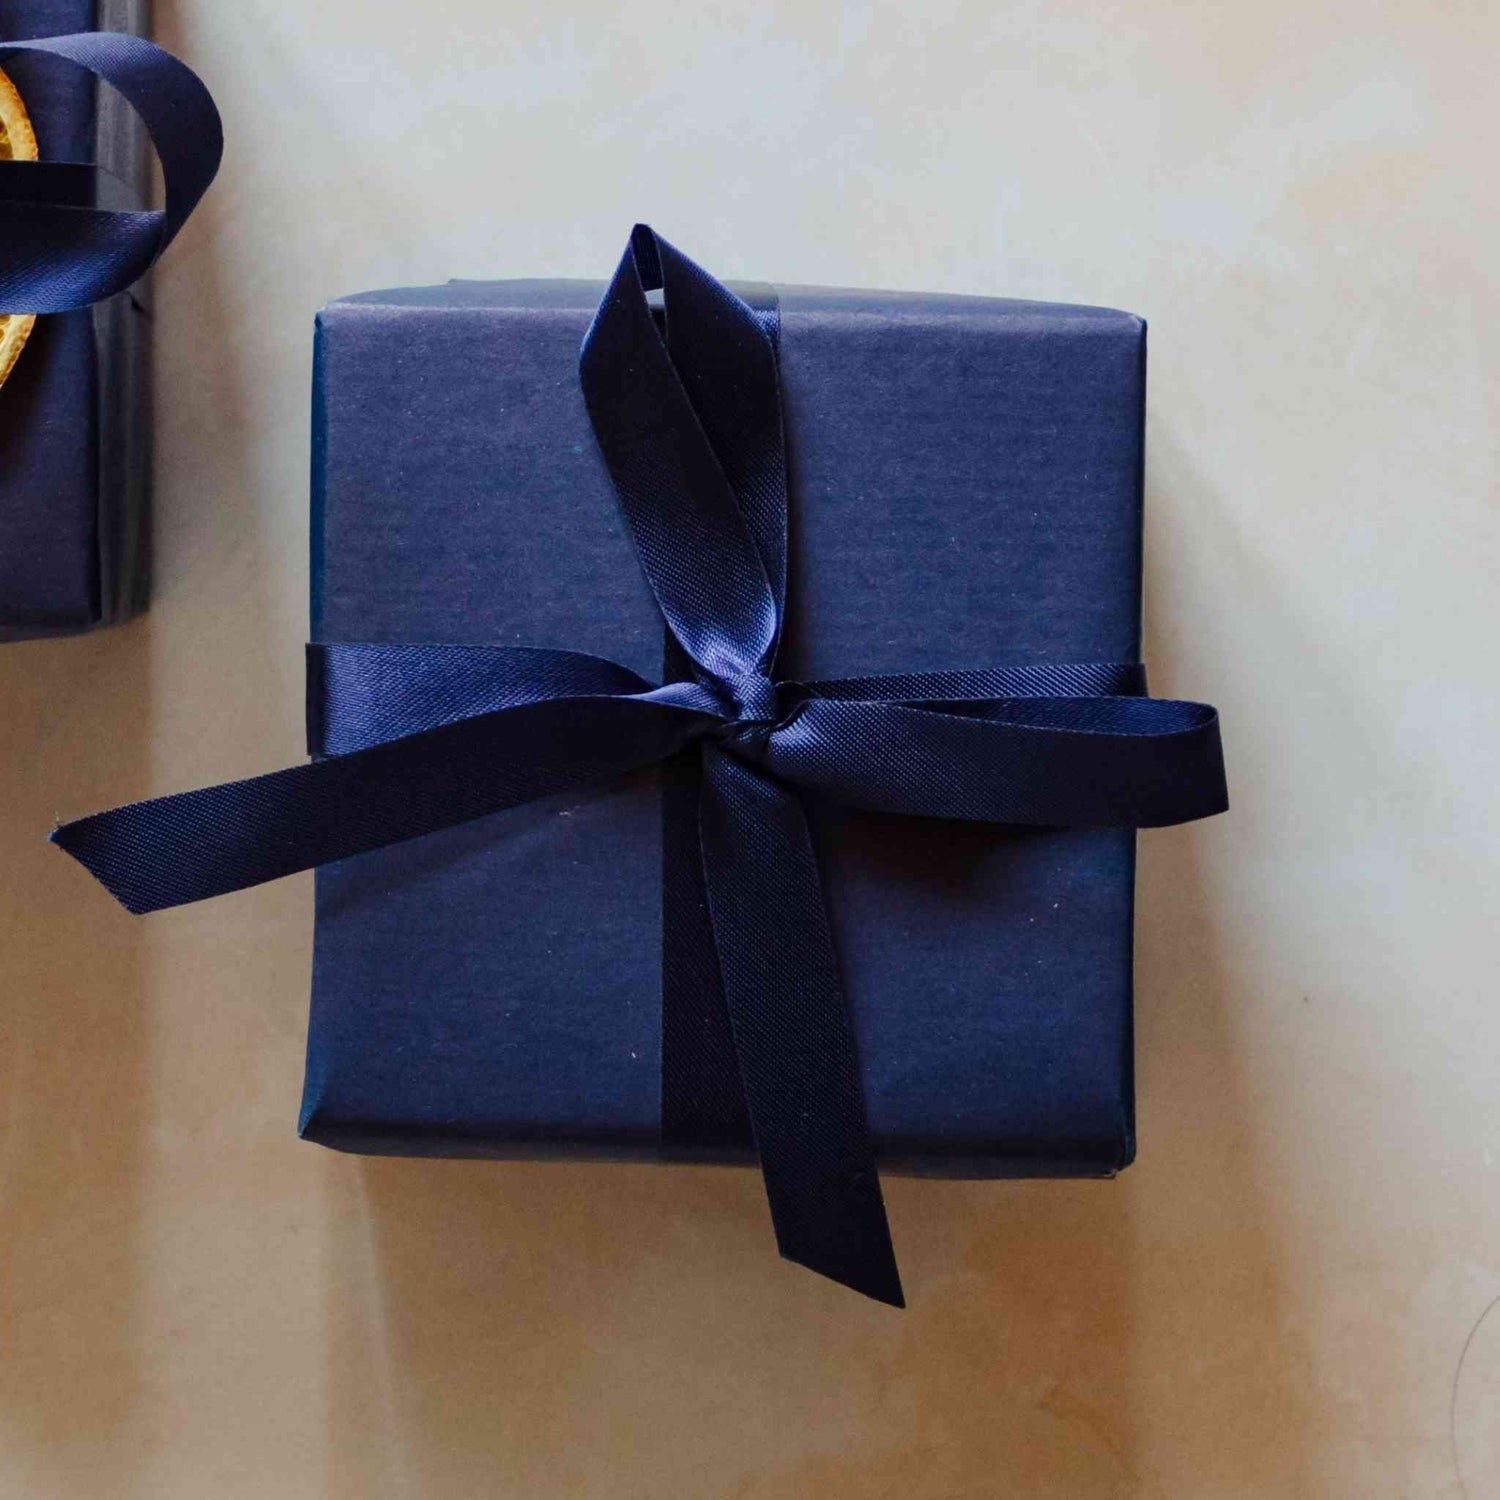 A 200g floral scented soy candle from the Home County Co. is shown with luxury Gift Wrap. The candle is wrapped in luxury navy wrapping paper secured with navy ribbon.